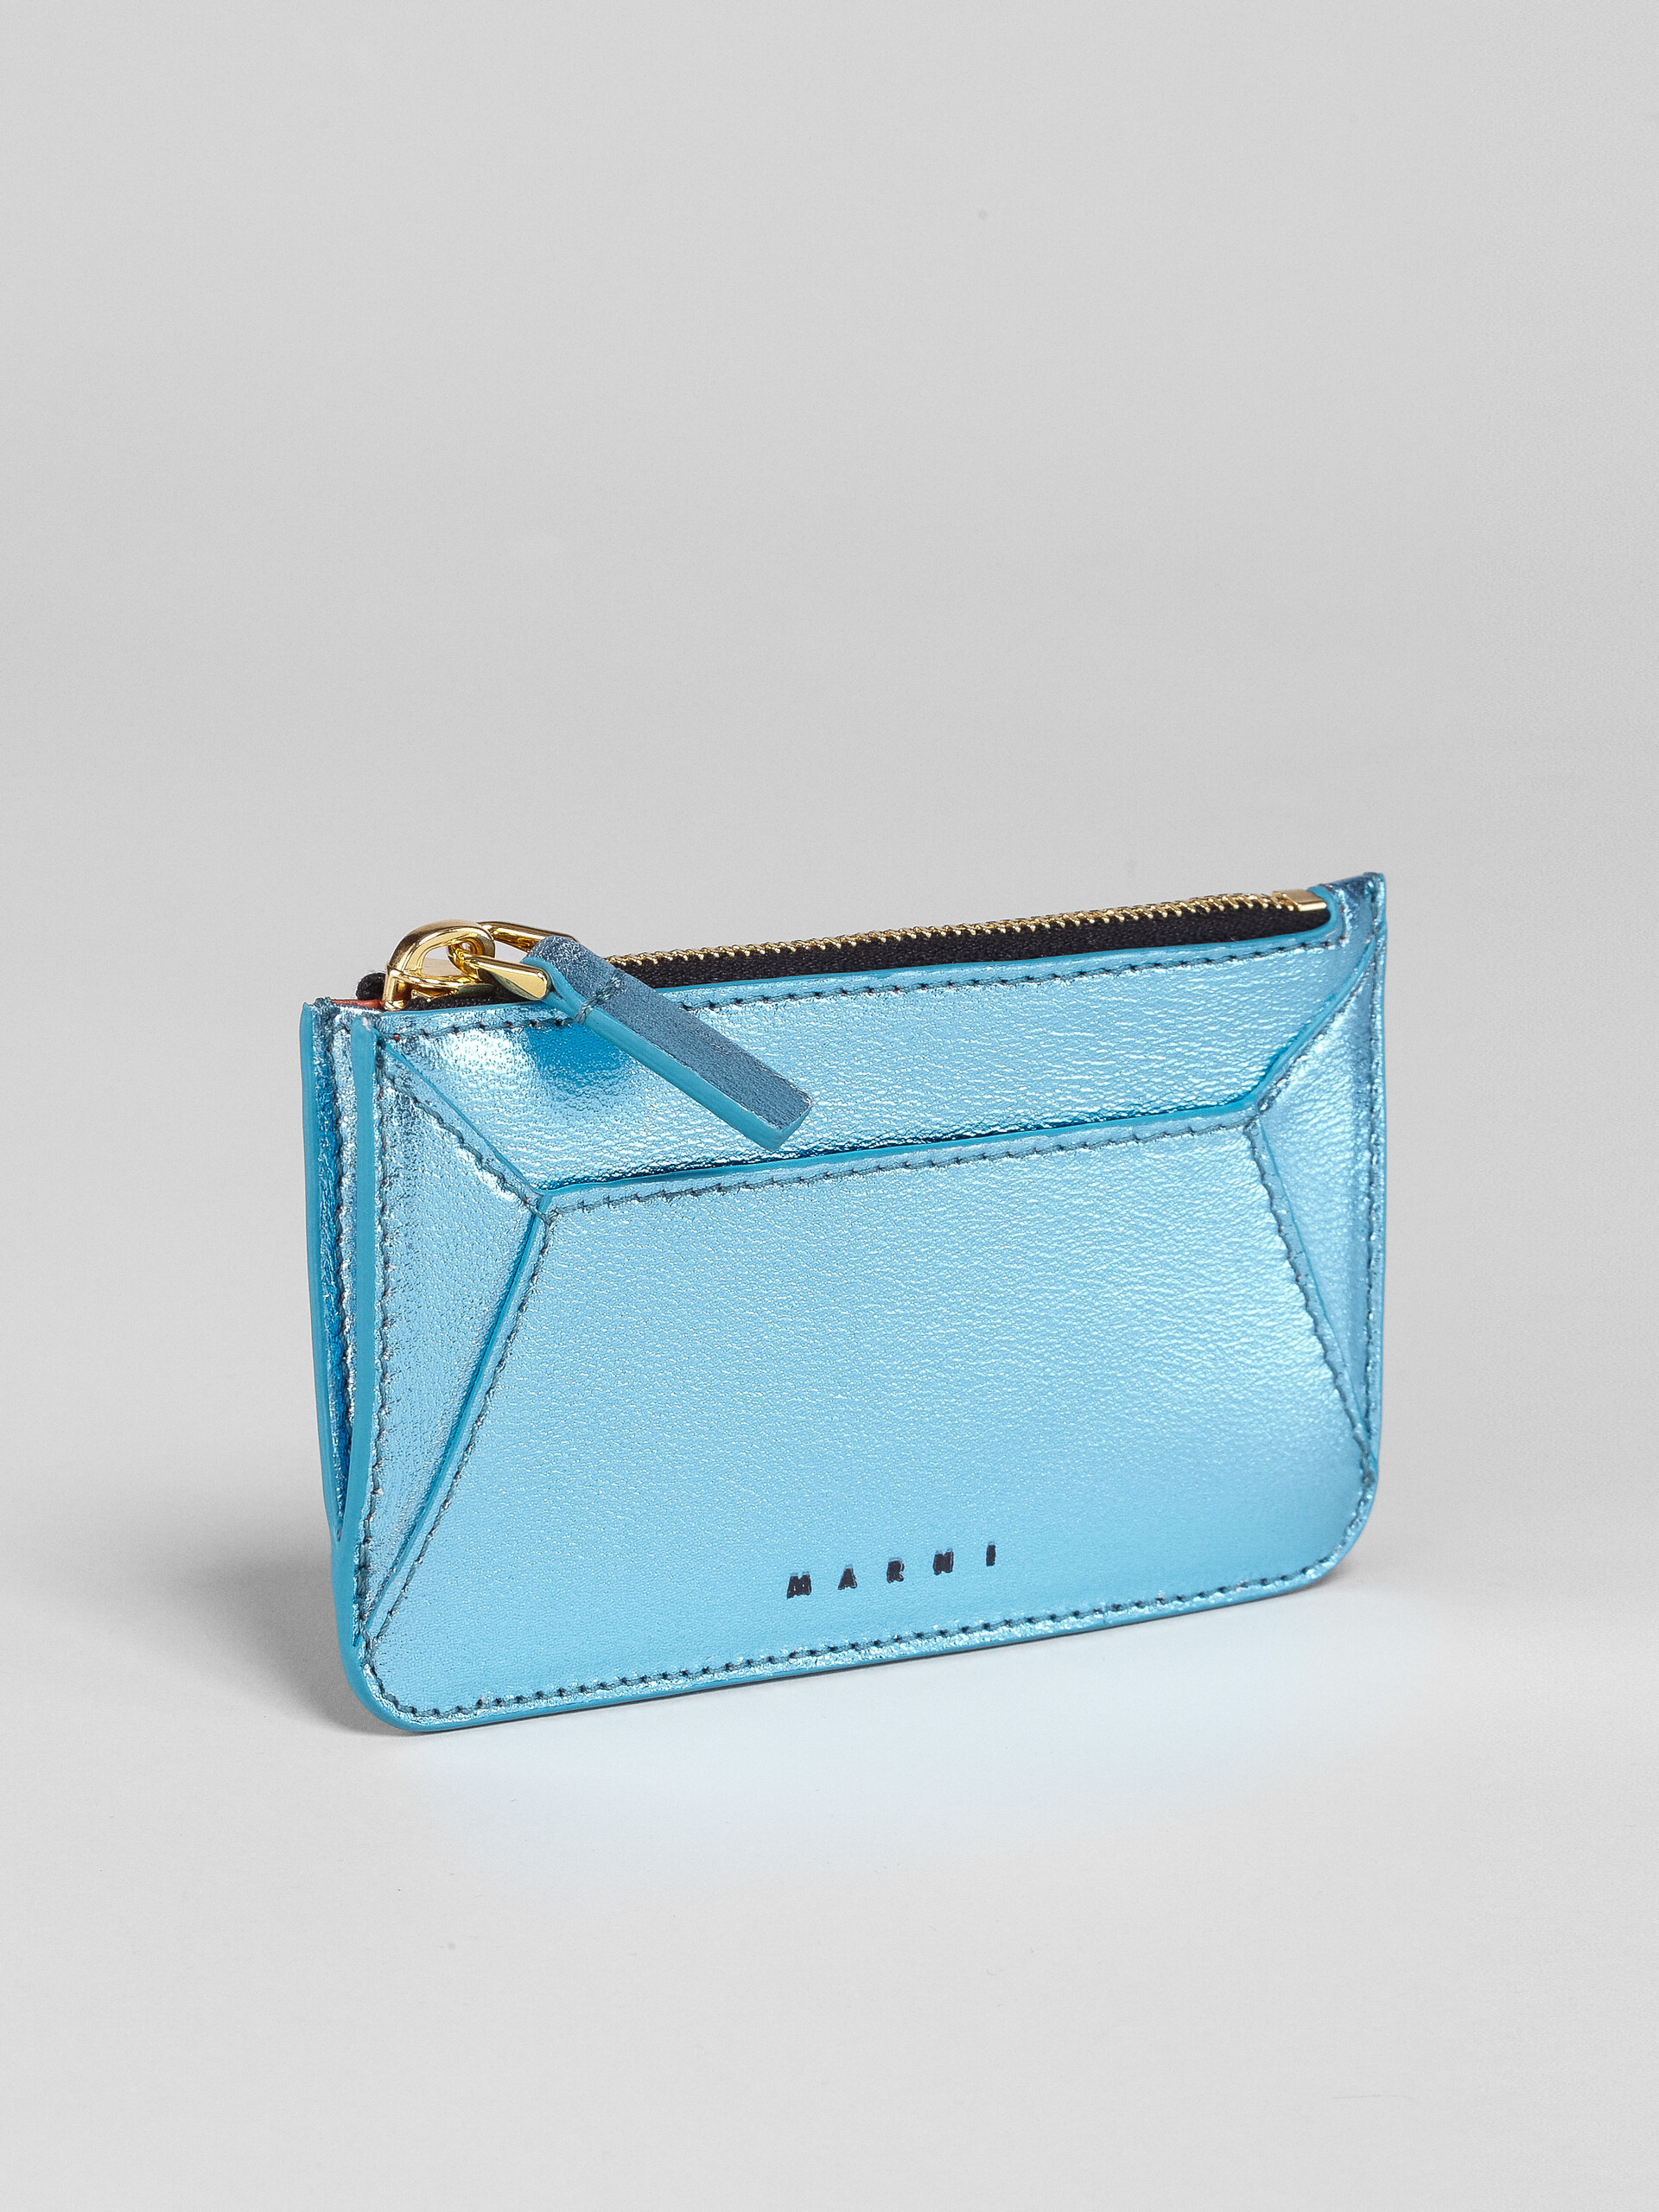 Pale blue metallic nappa leather card case - Wallets - Image 4